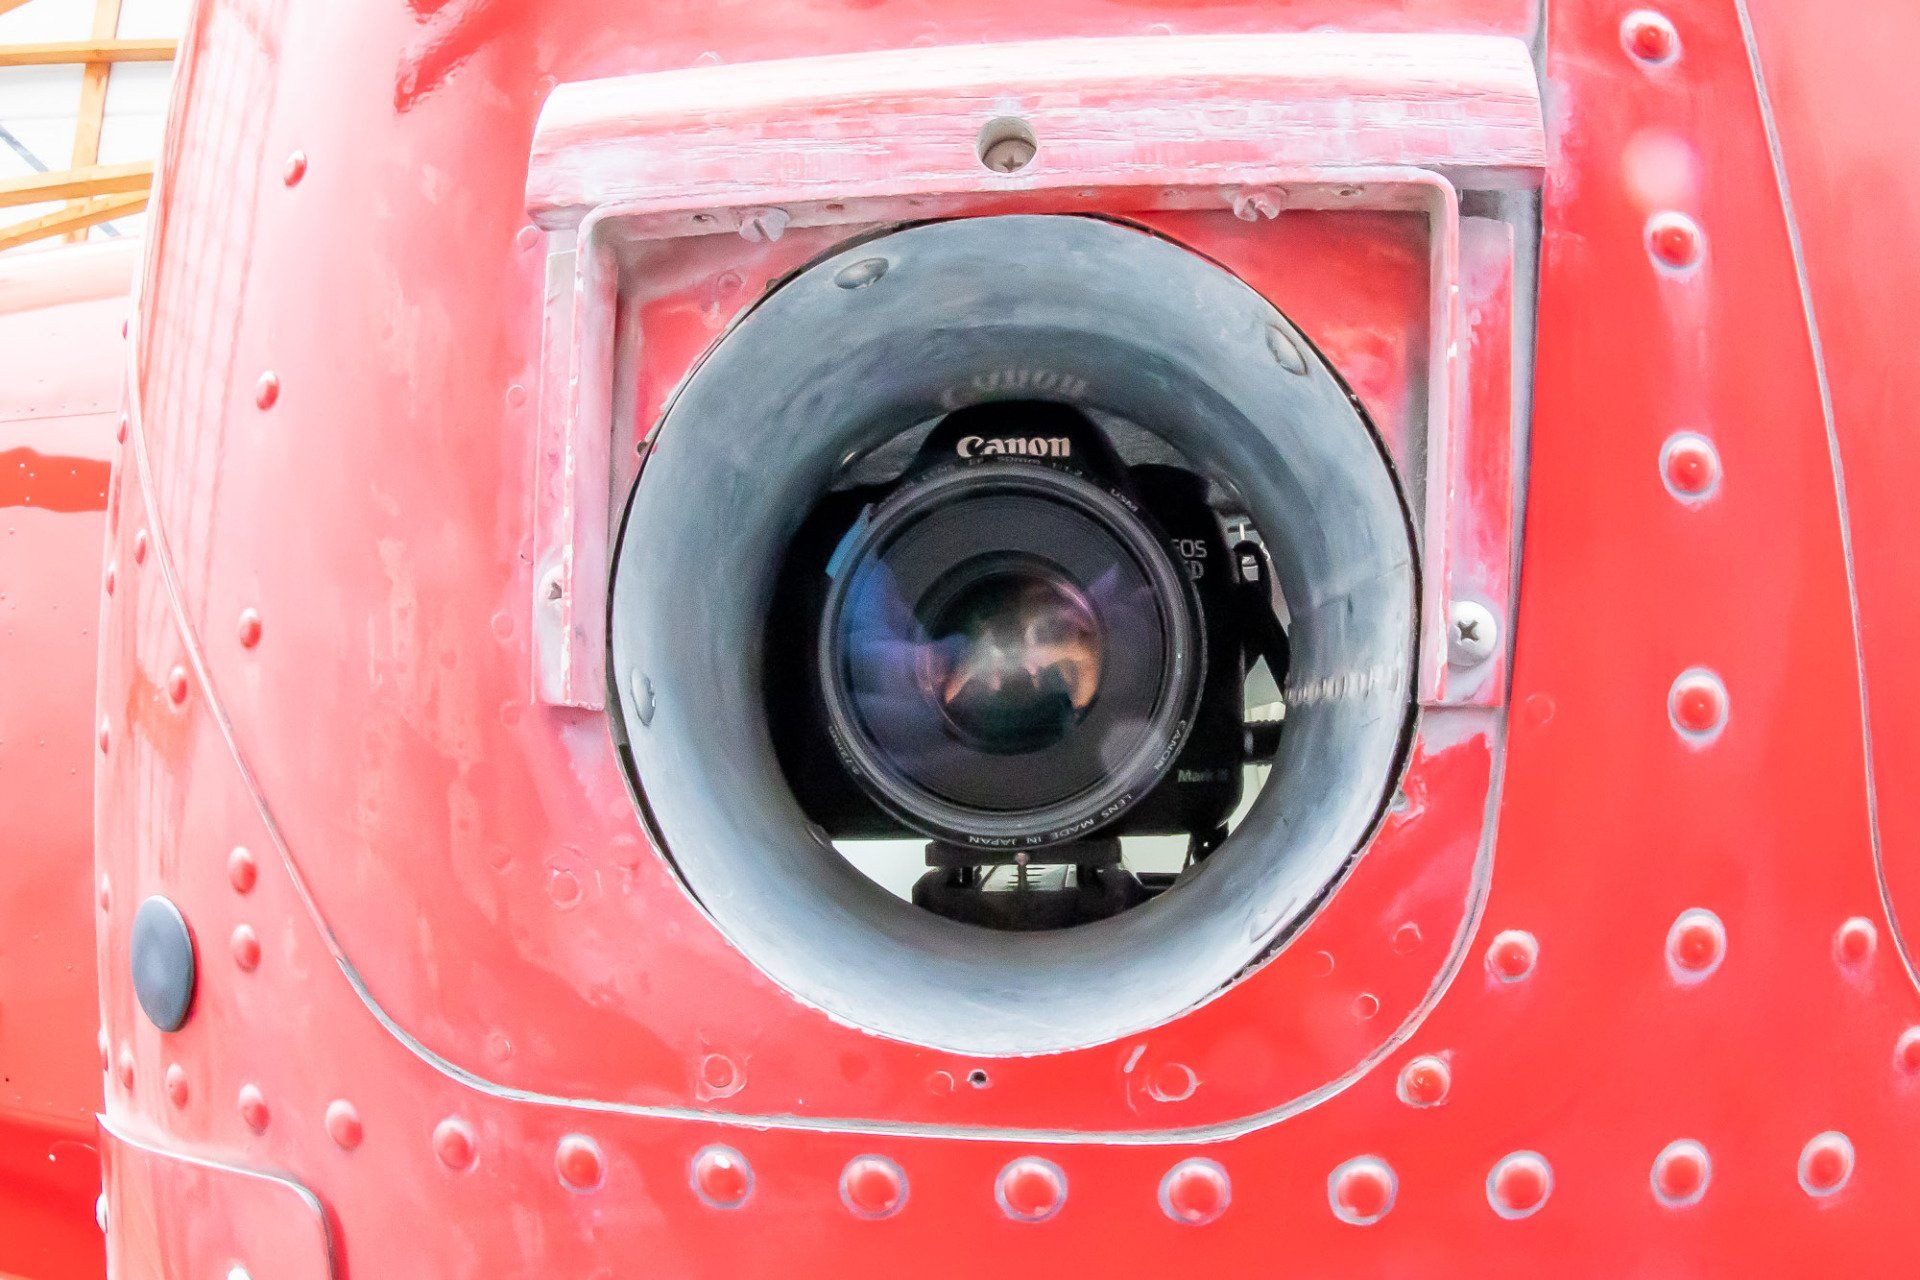 Mapping camera, Cannon 5Diii, viewed from below